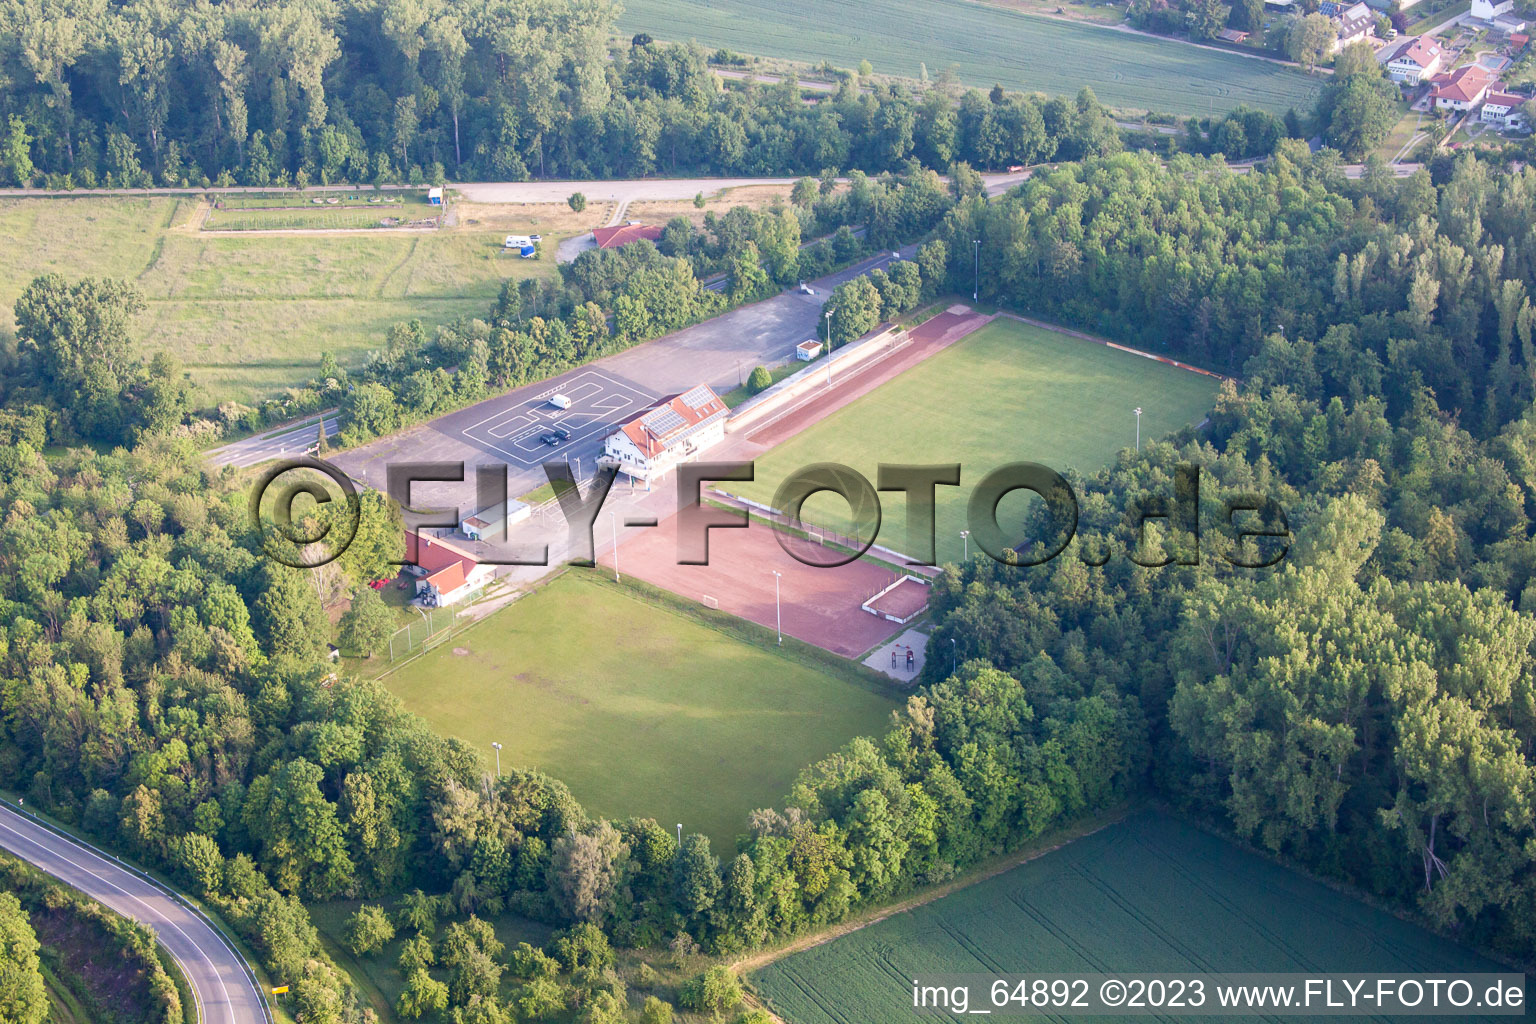 Aerial photograpy of Playground VFR in the district Rheinsheim in Philippsburg in the state Baden-Wuerttemberg, Germany